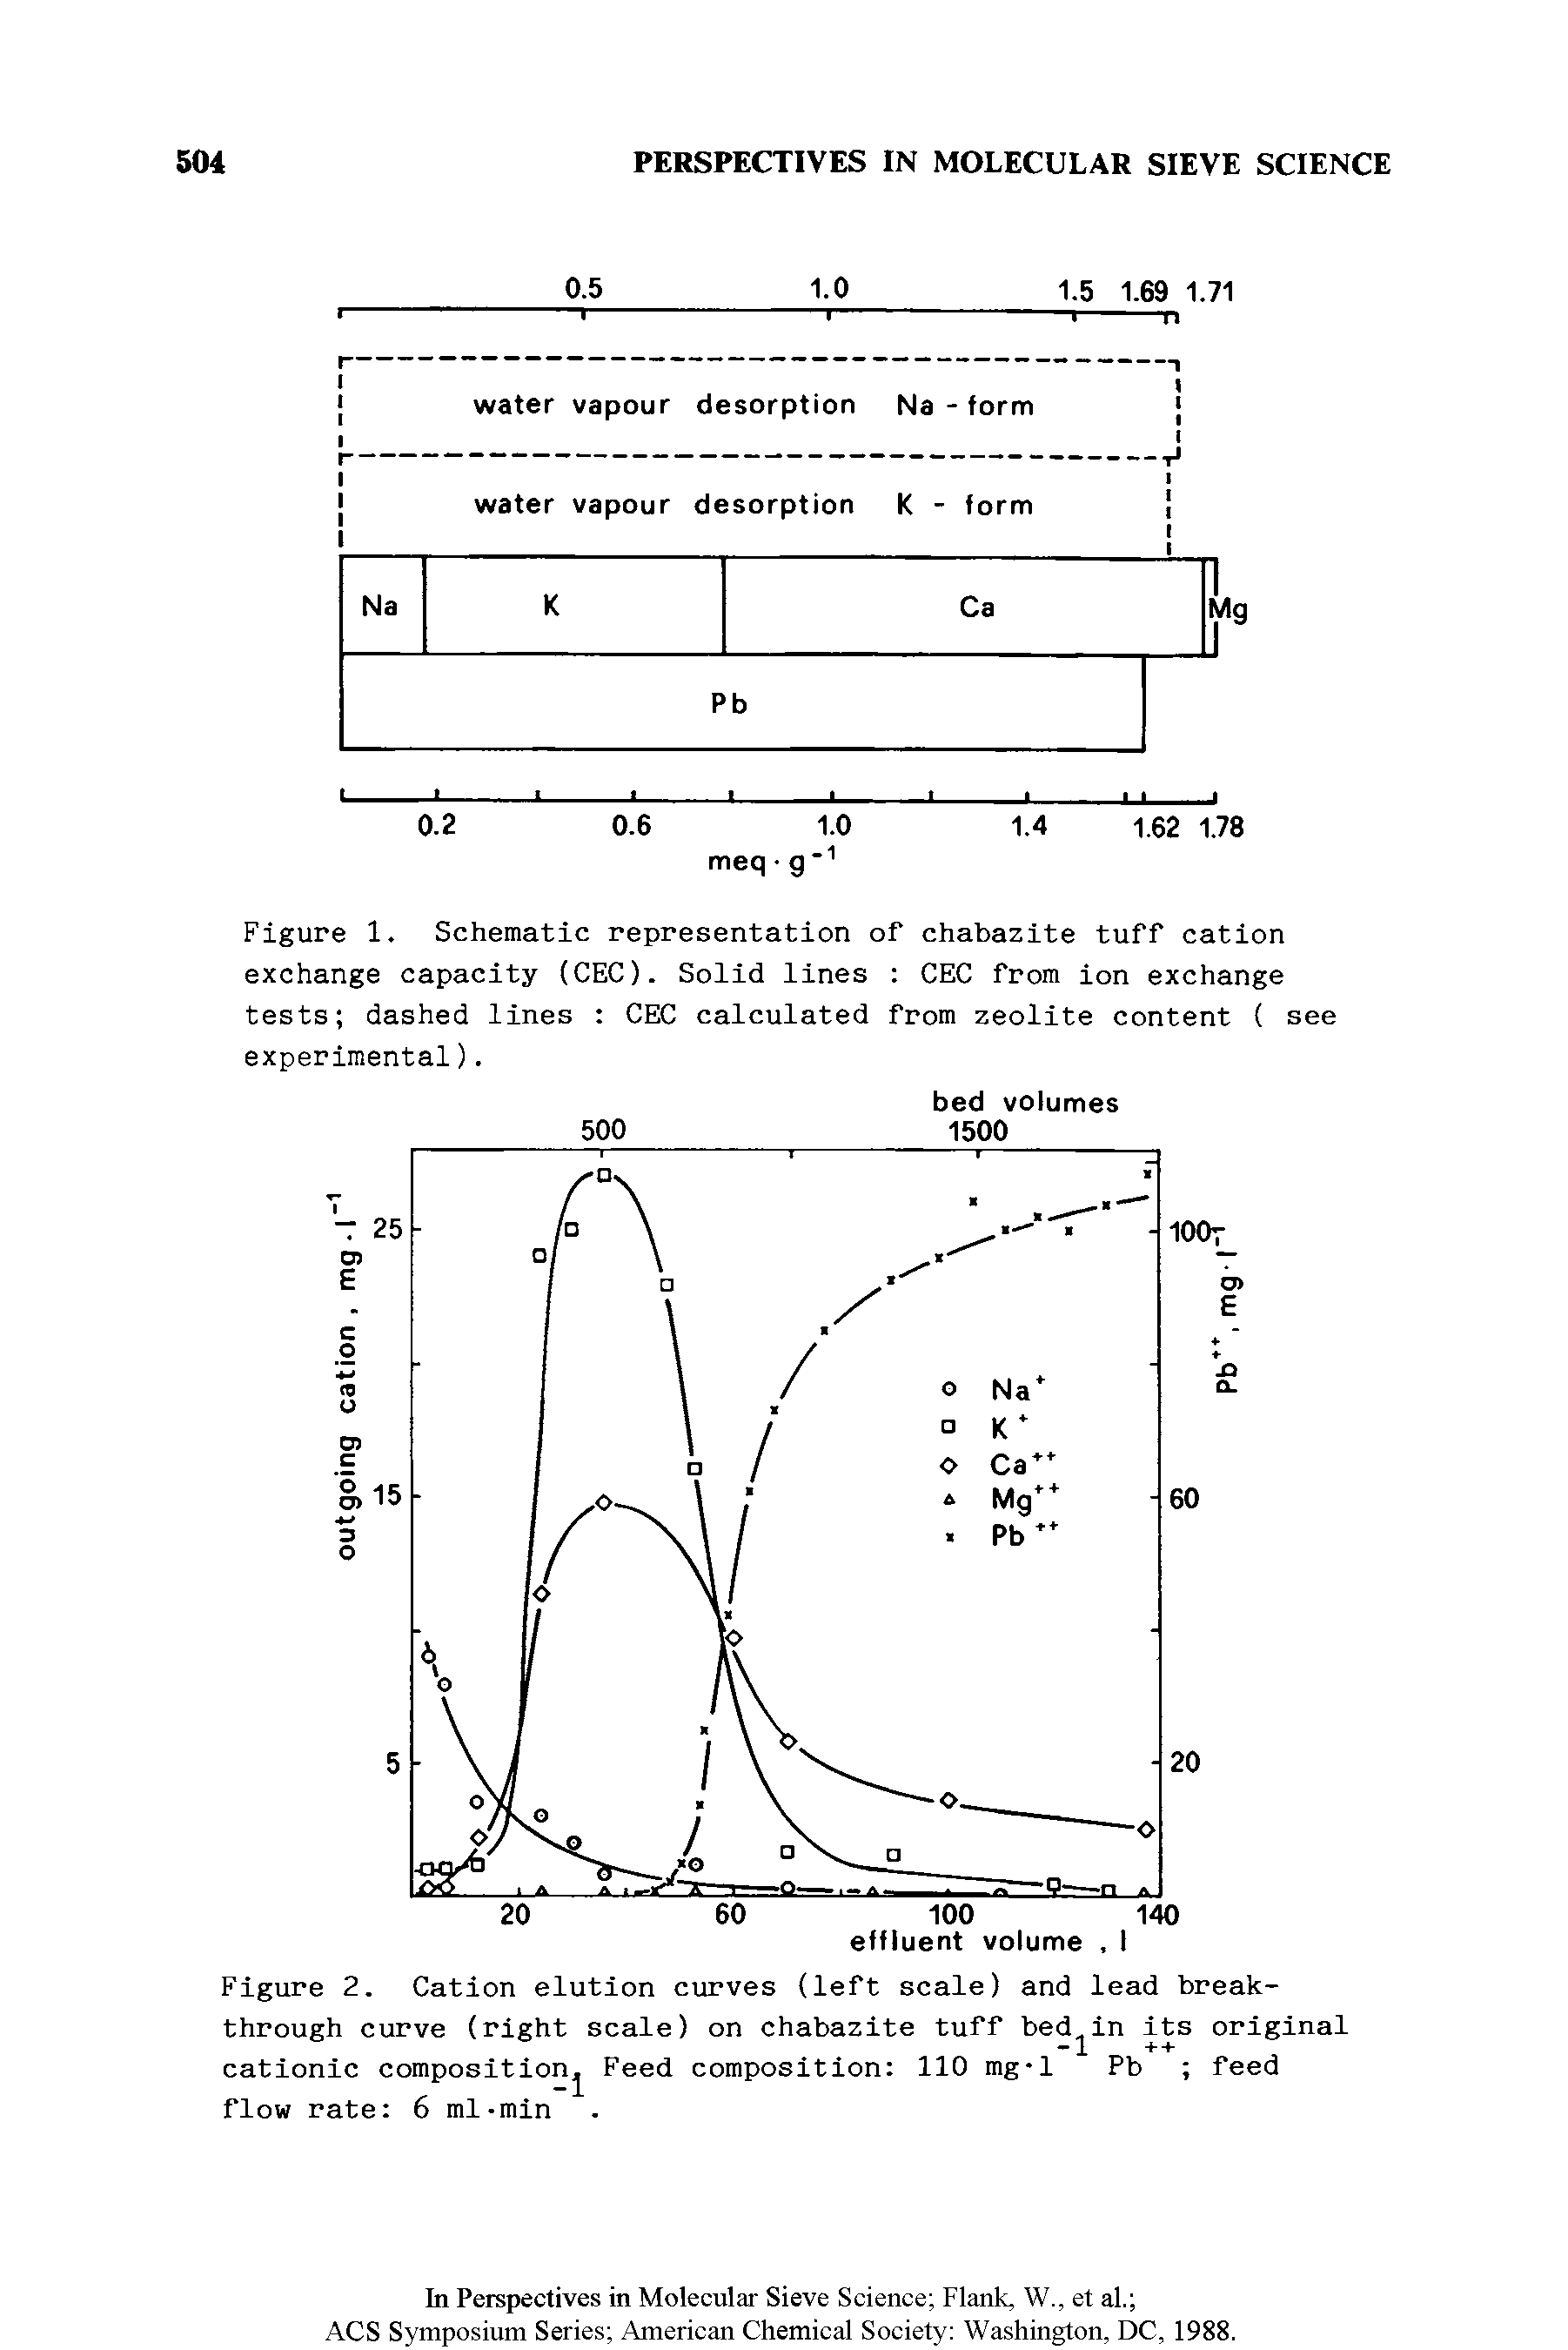 Figure 2. Cation elution curves (left scale) and lead breakthrough curve (right scale) on chabazite tuff bed in its original cationic composition Feed composition 110 mg-1 Pb feed flow rate 6 ml-min...